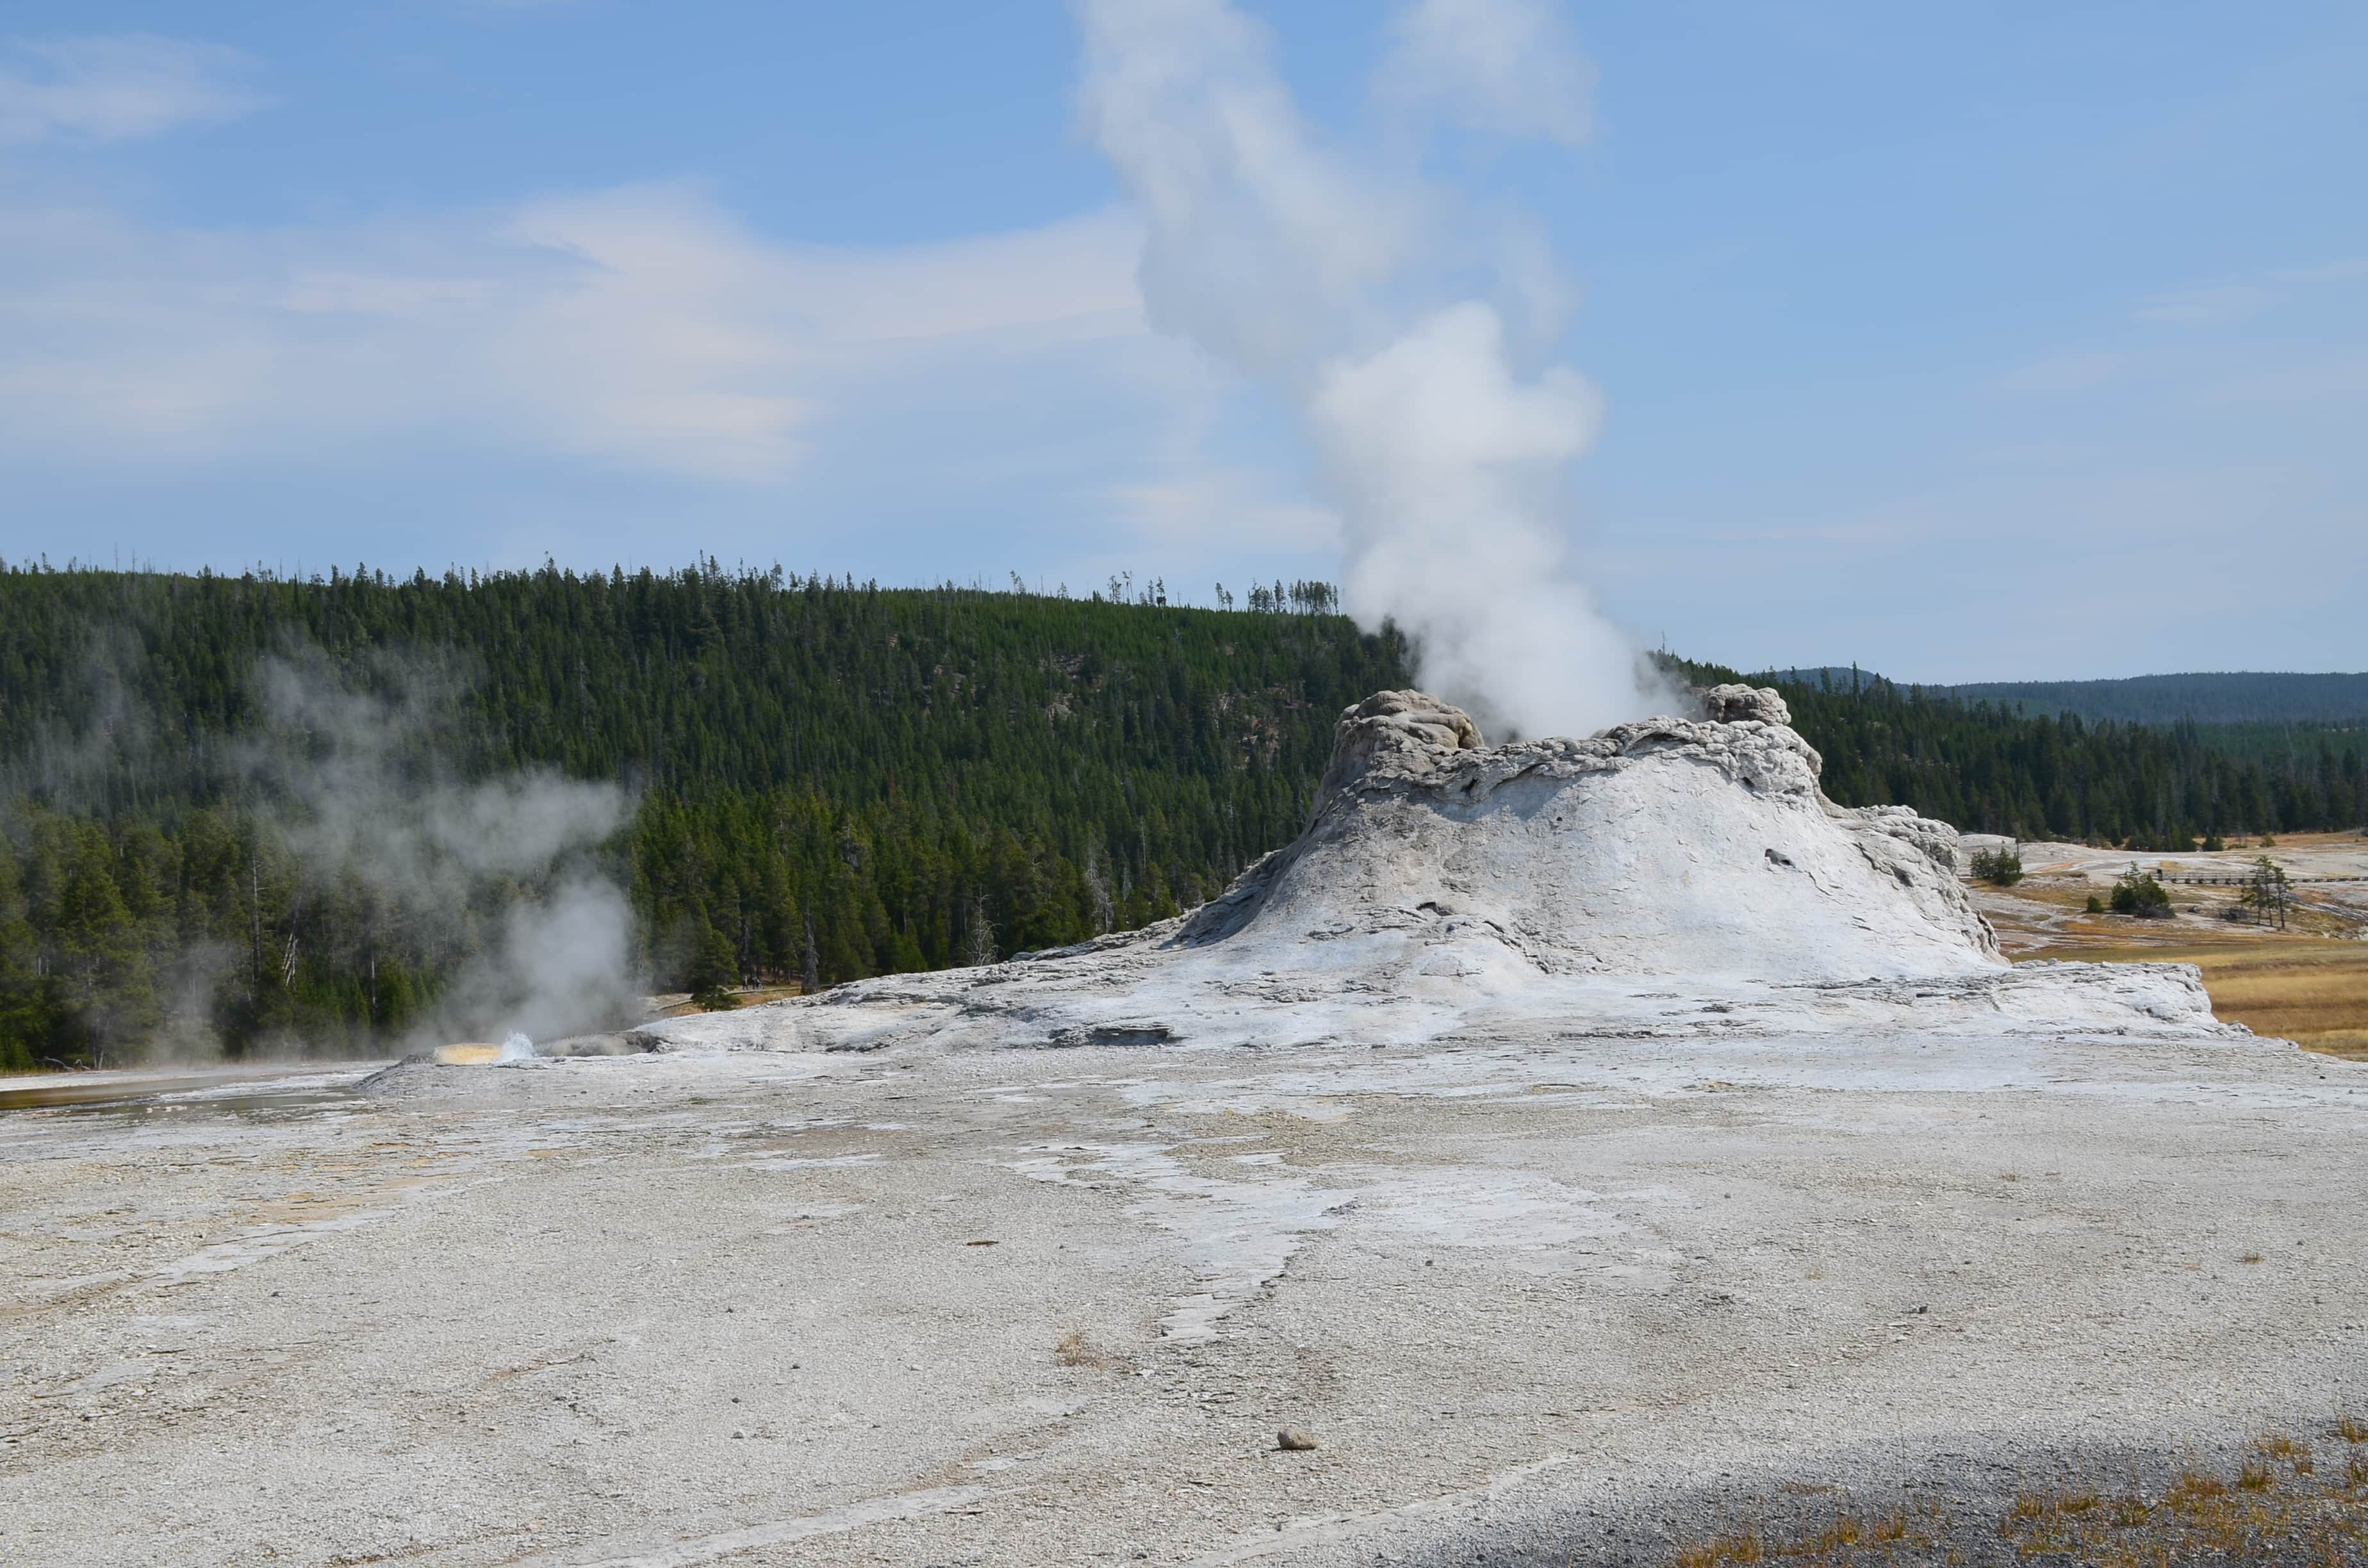 Castle Geyser at the Upper Geyser Basin in Yellowstone National Park, Wyoming